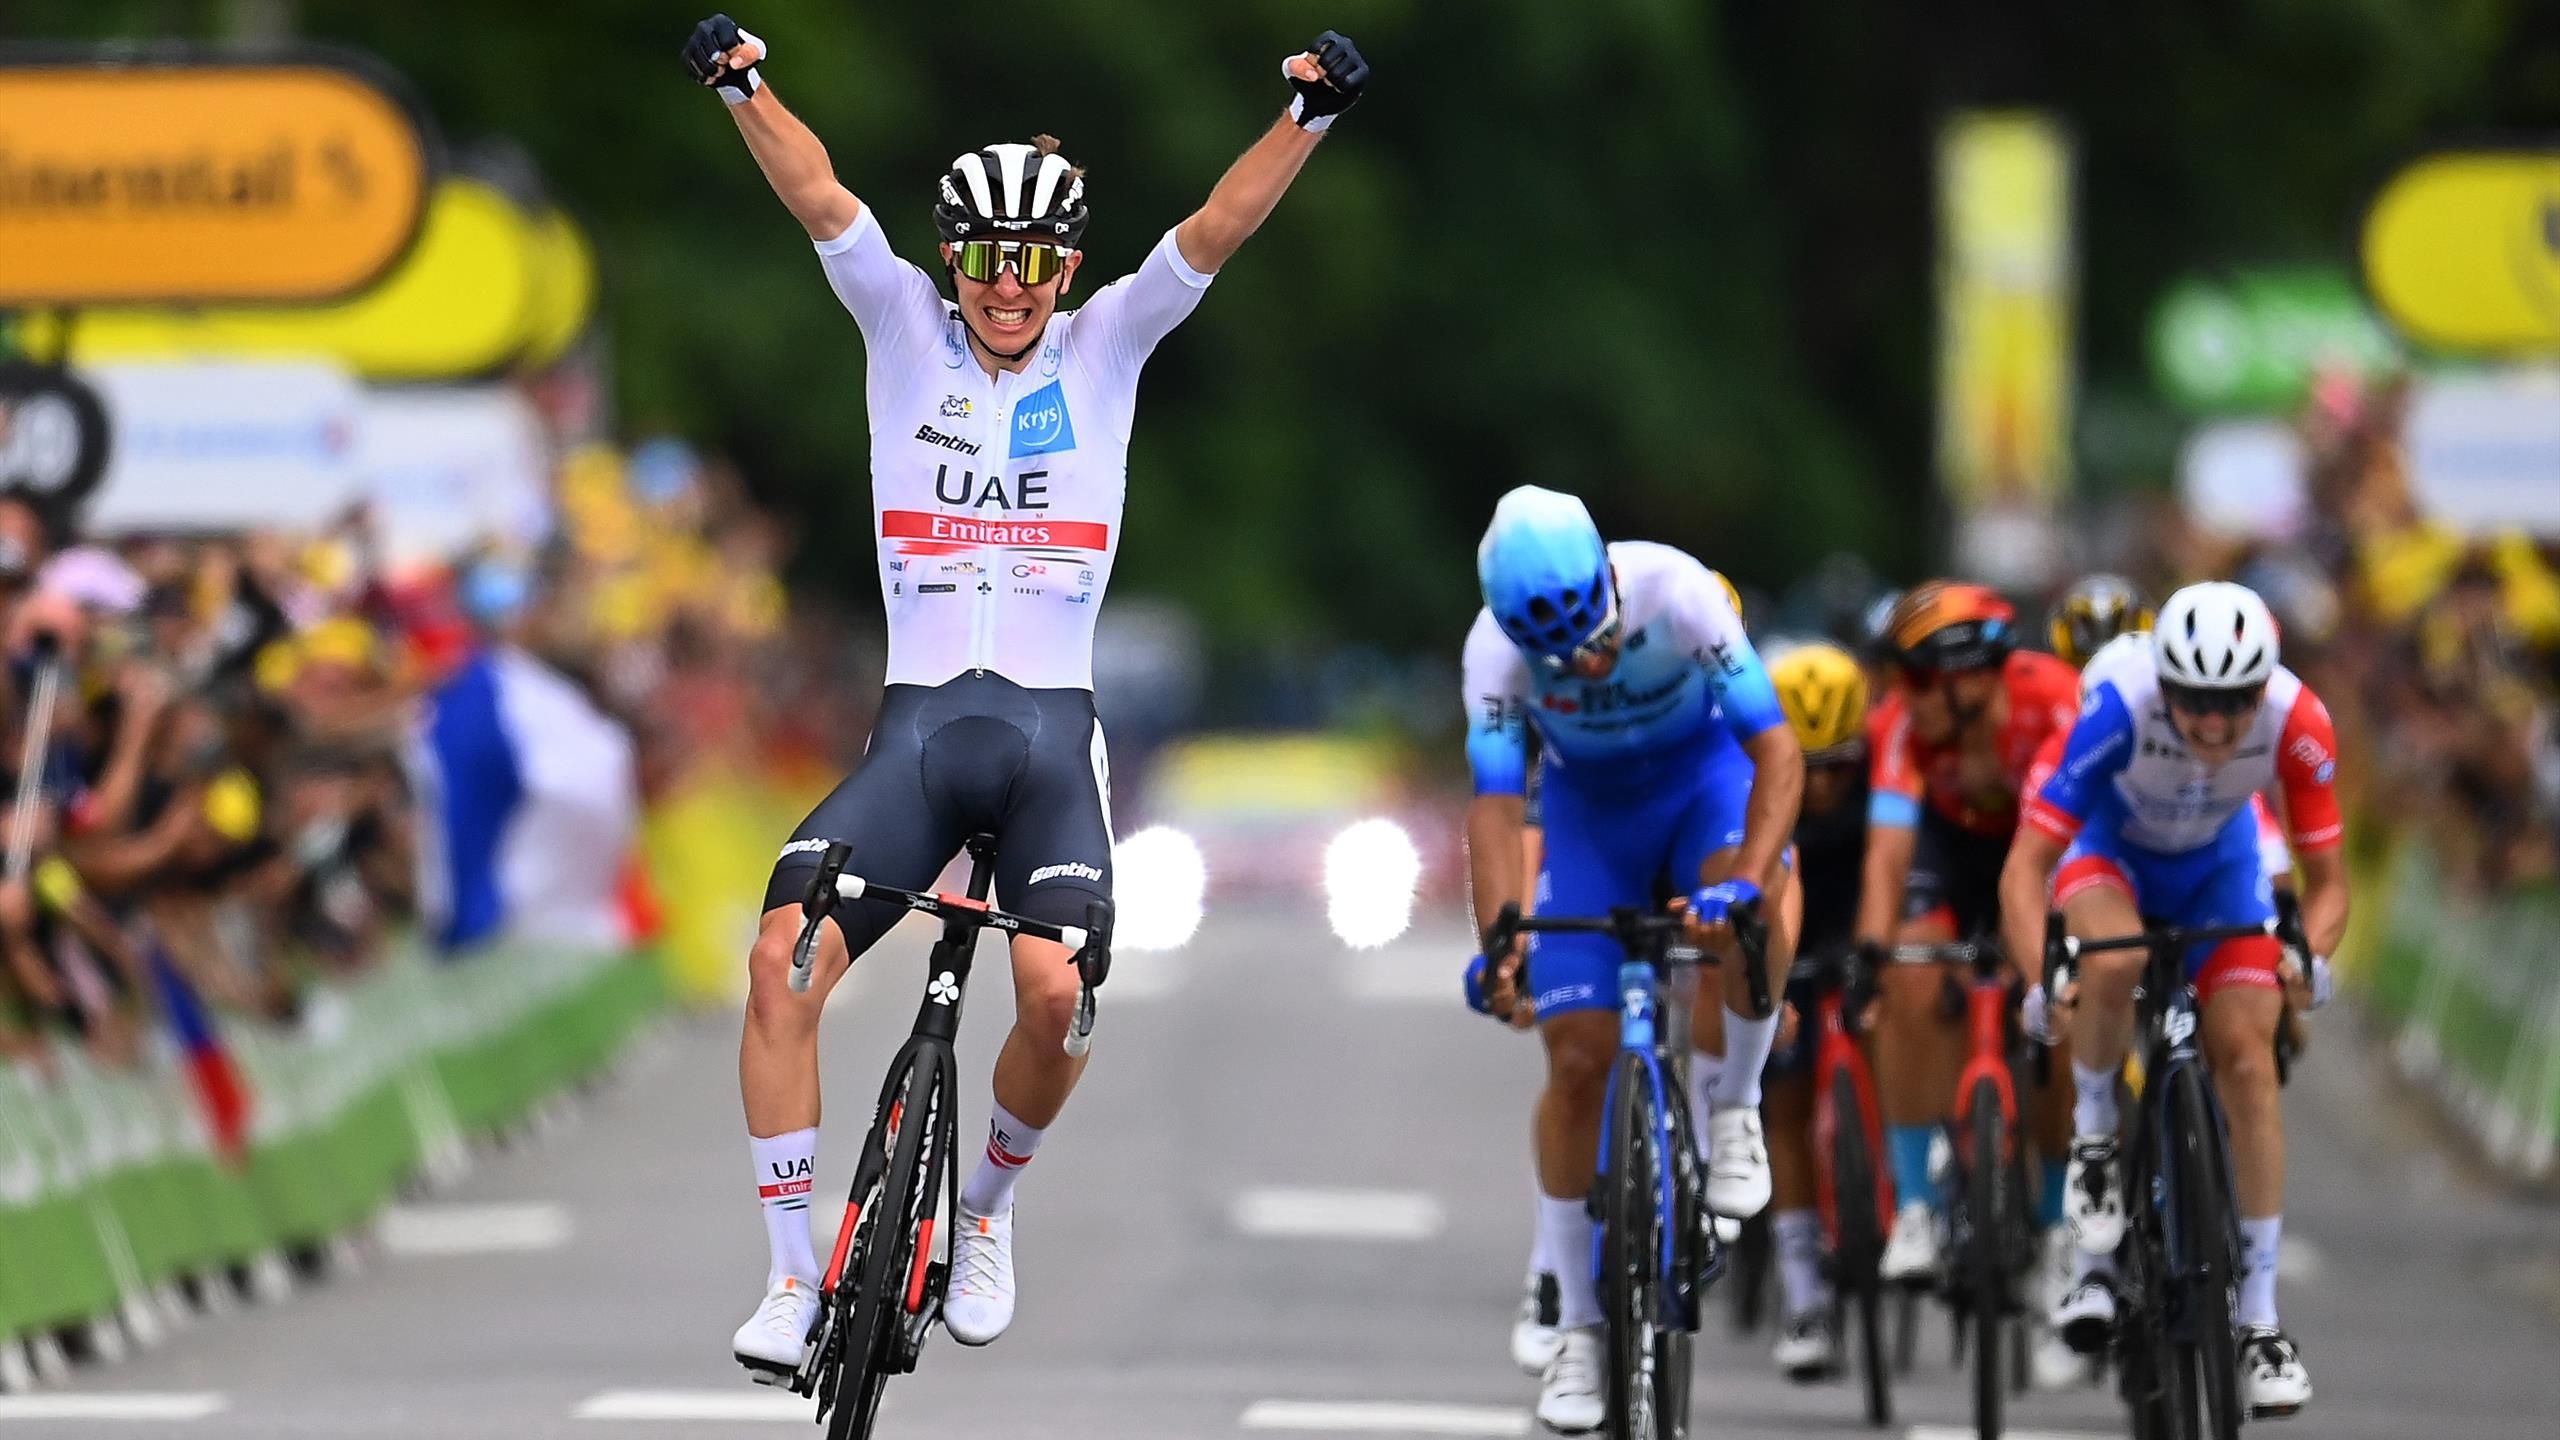 Tour de France 2022: Tadej Pogacar goes into yellow with Stage 6 win after astonishing Wout van Aert effort